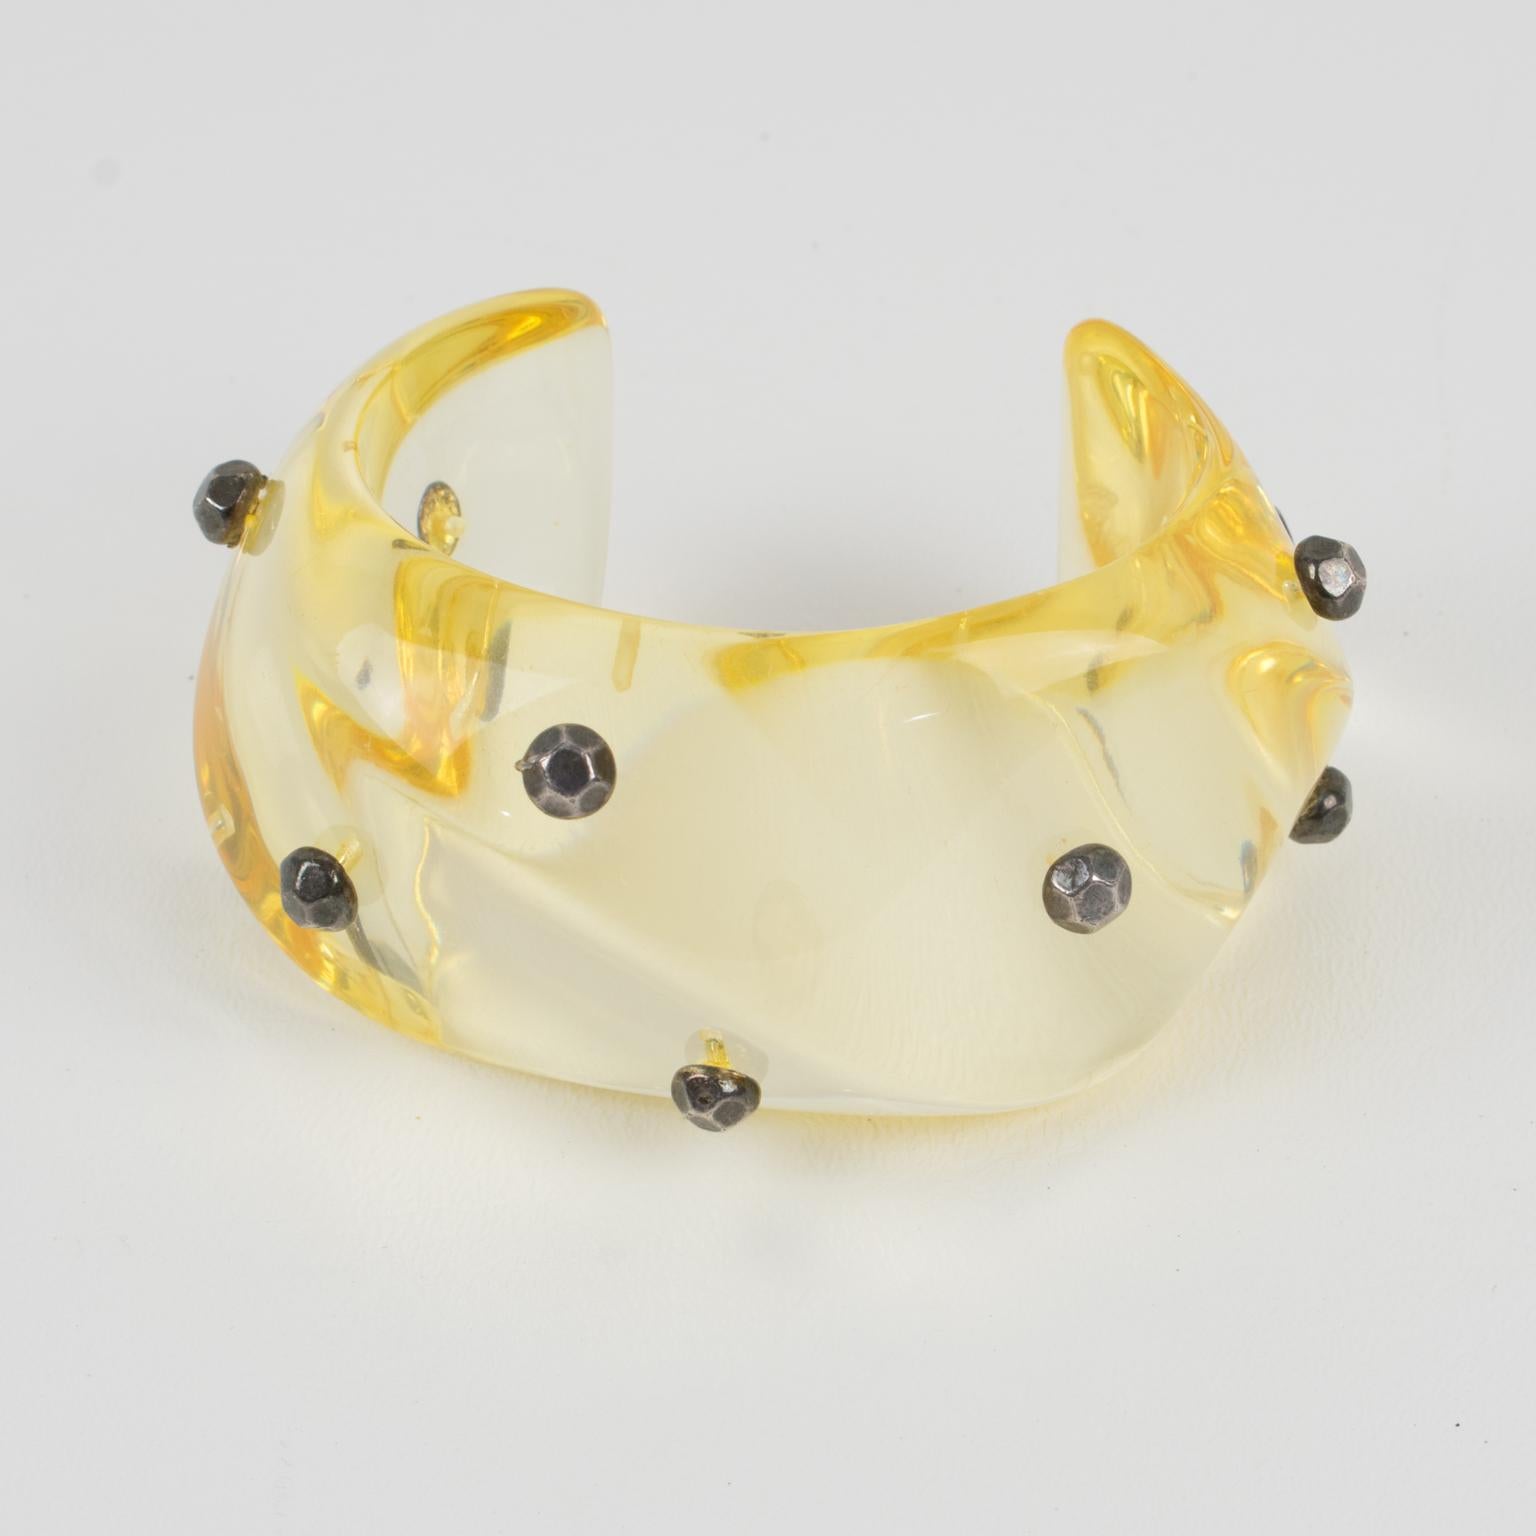 This lovely oversized Lucite cuff bracelet features a bold transparent yellow champagne color Lucite cuff shape with waved carving, topped with faceted silvered metal studs in gunmetal color. There is no visible maker's mark.
Measurements:
Inside